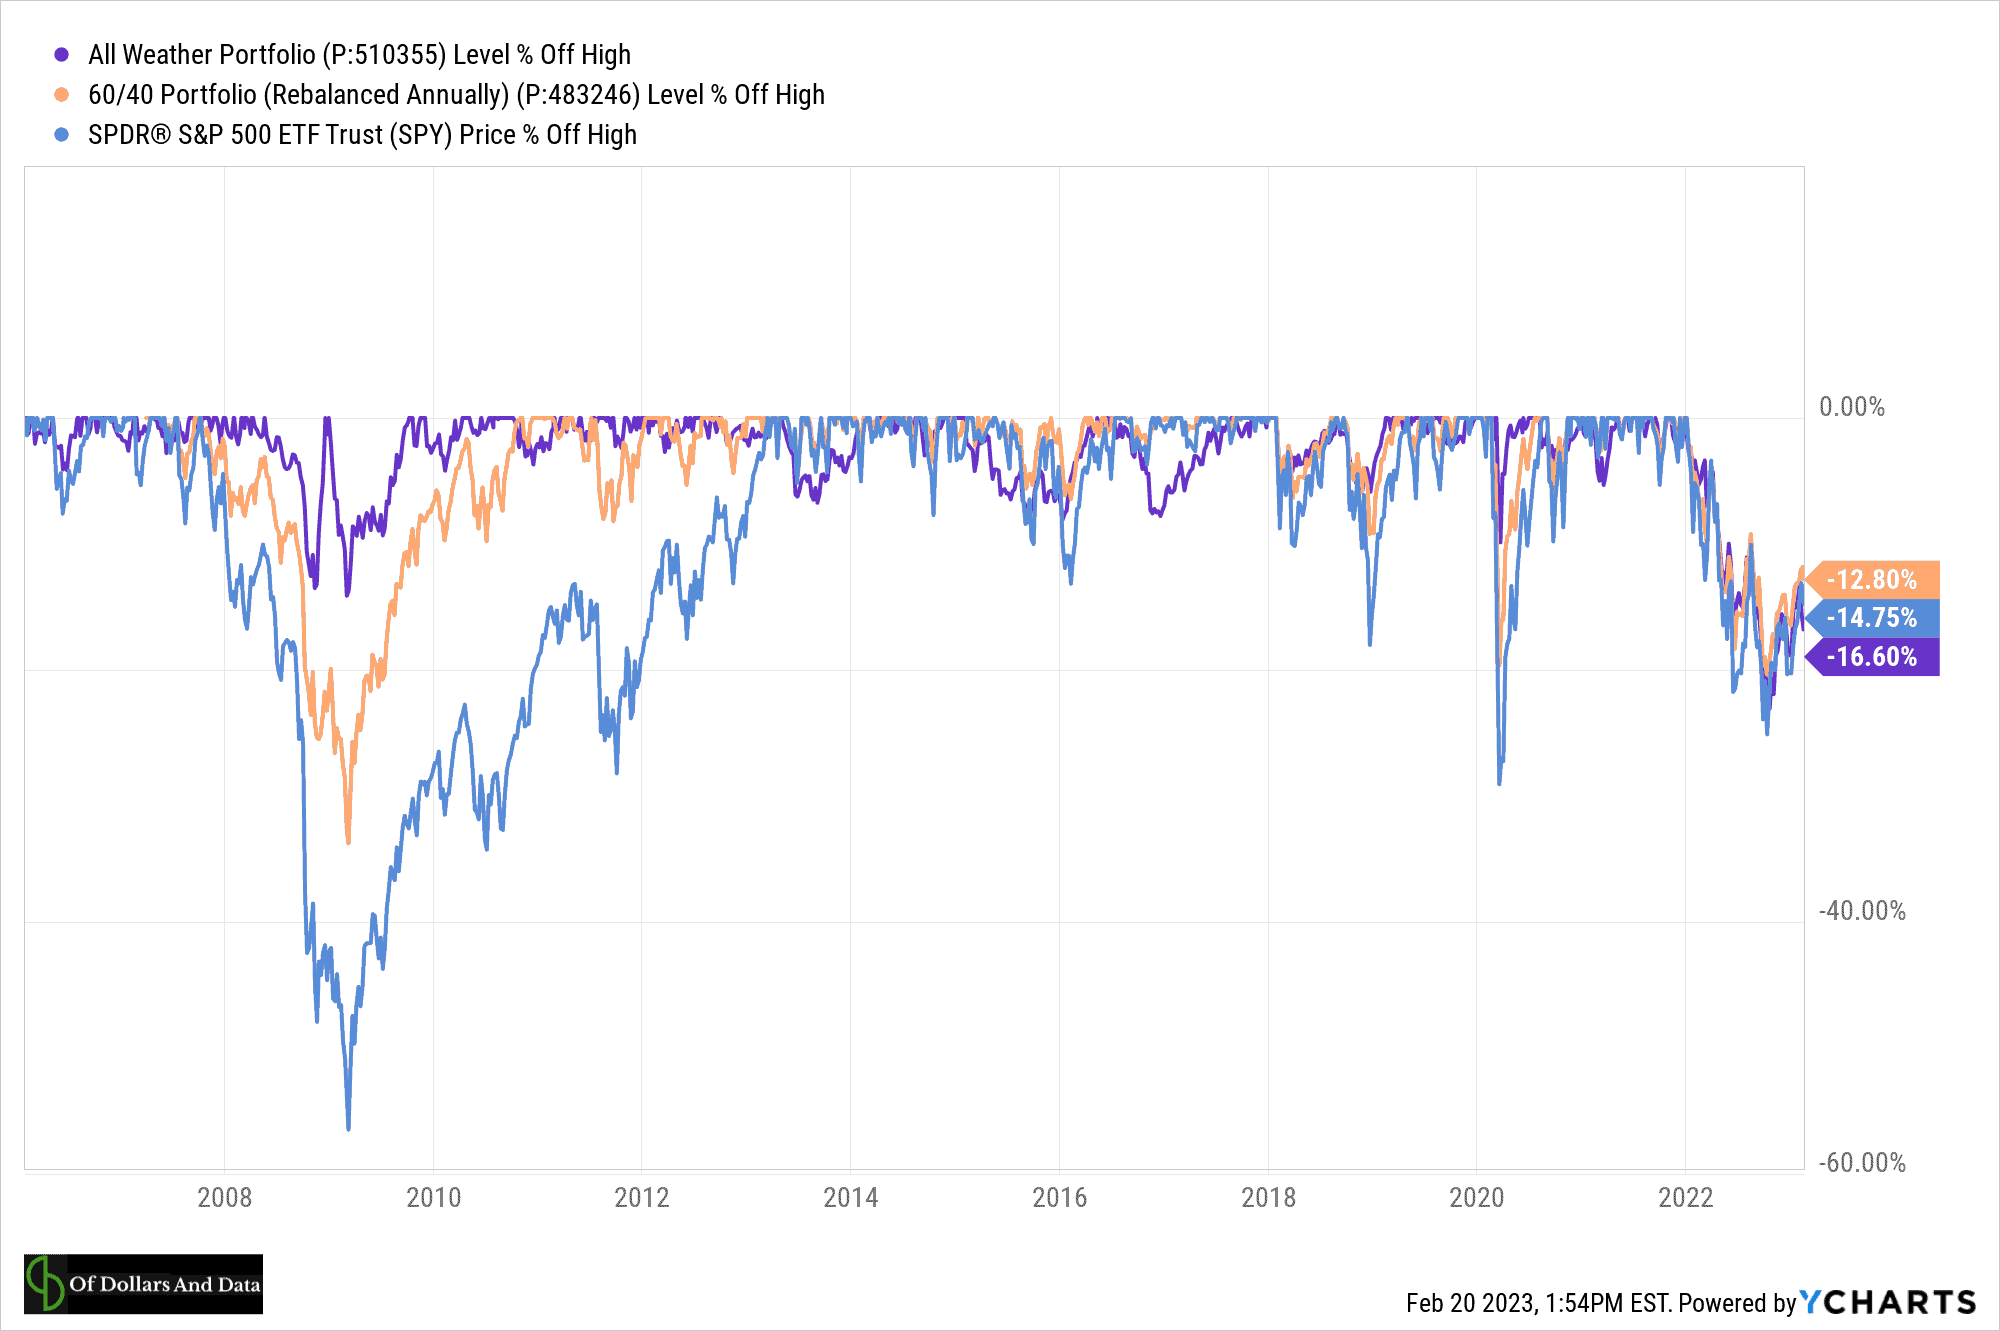 Drawdowns of the All Weather Portfolio, 60/40, and S&P 500 since the early Feb 2006 to 2022.